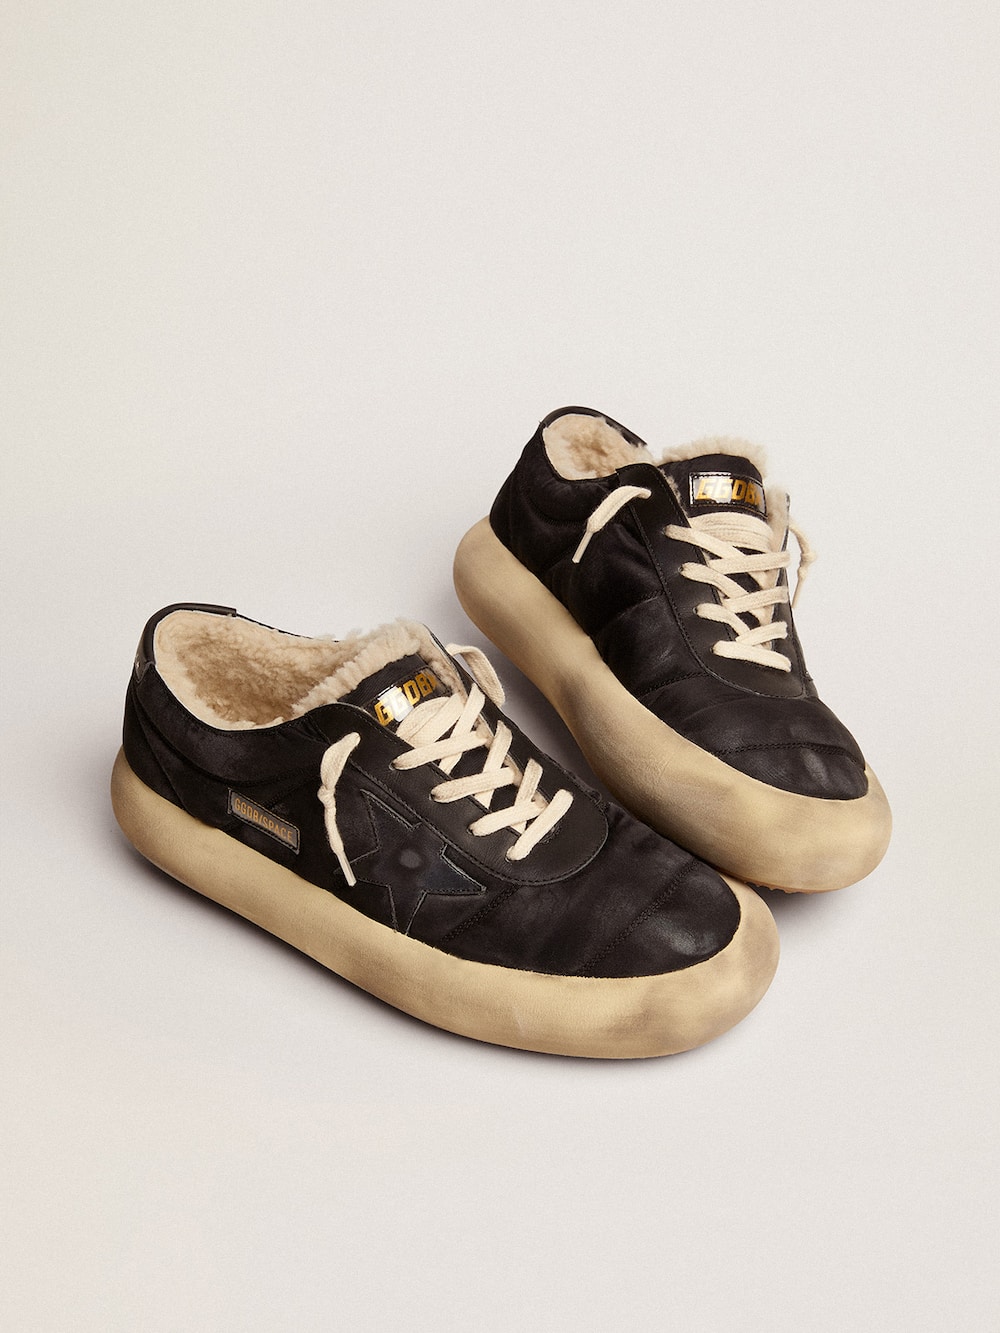 Golden Goose - Women's Space-Star shoes in quilted black nylon with shearling lining in 